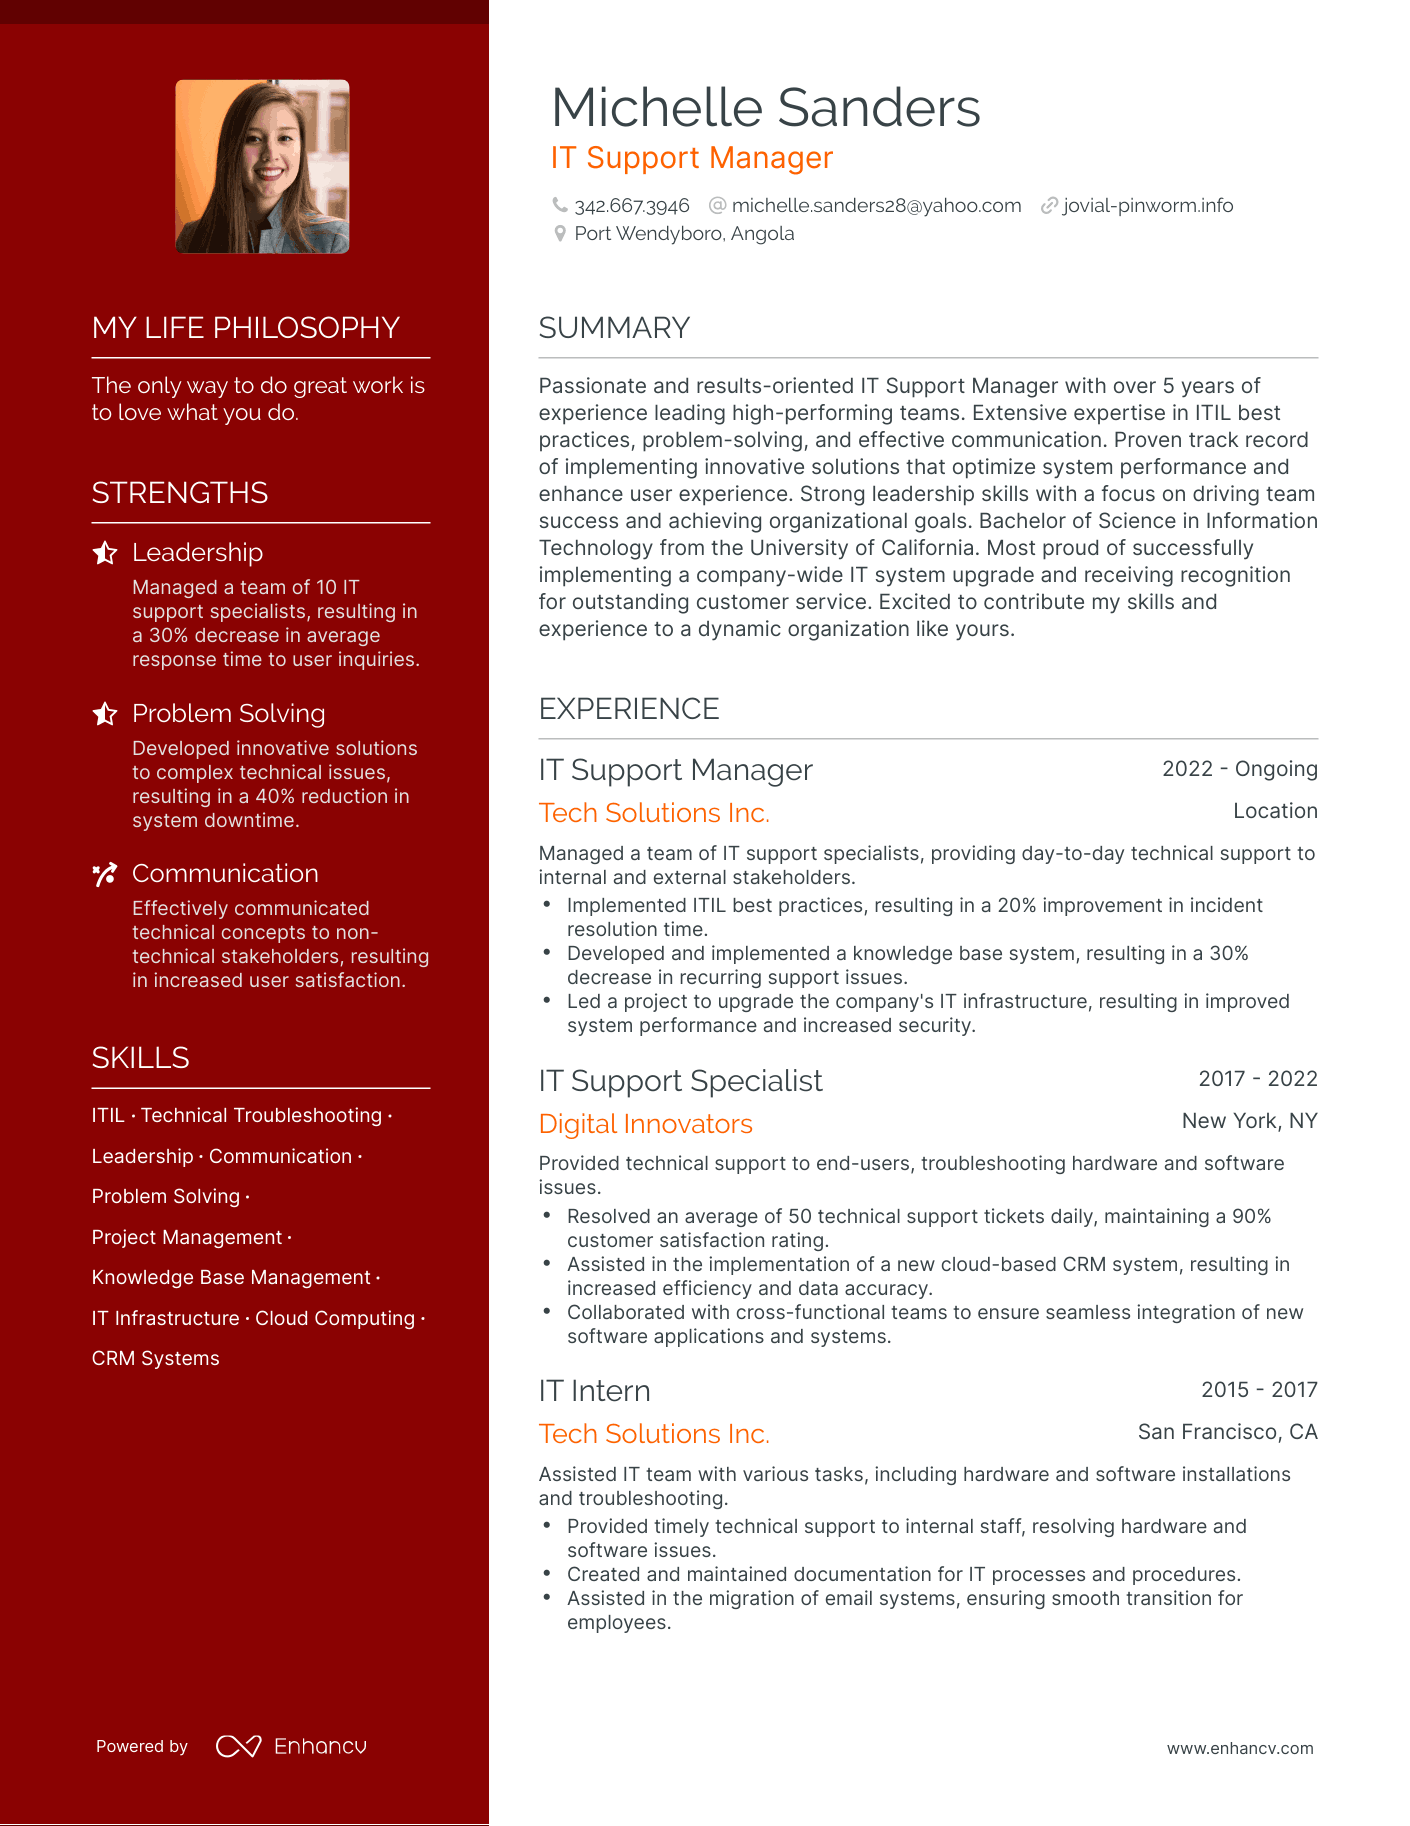 IT Support Manager resume example